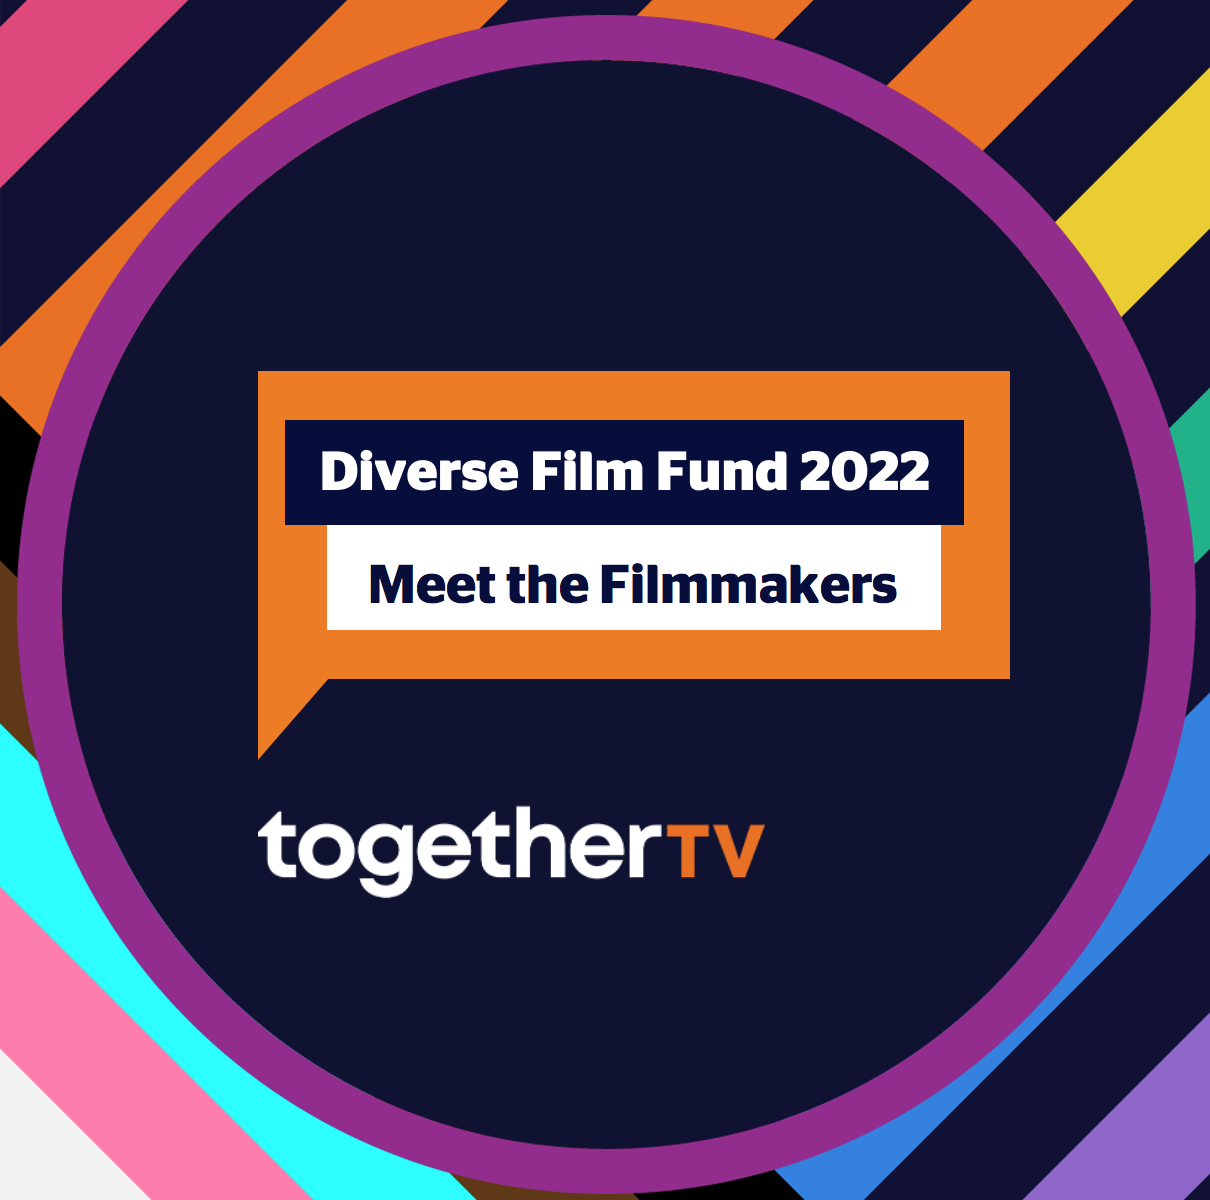 Meet the filmmakers text on a orange speech bubble, on a navy circle and surrounding them is the pride colours.